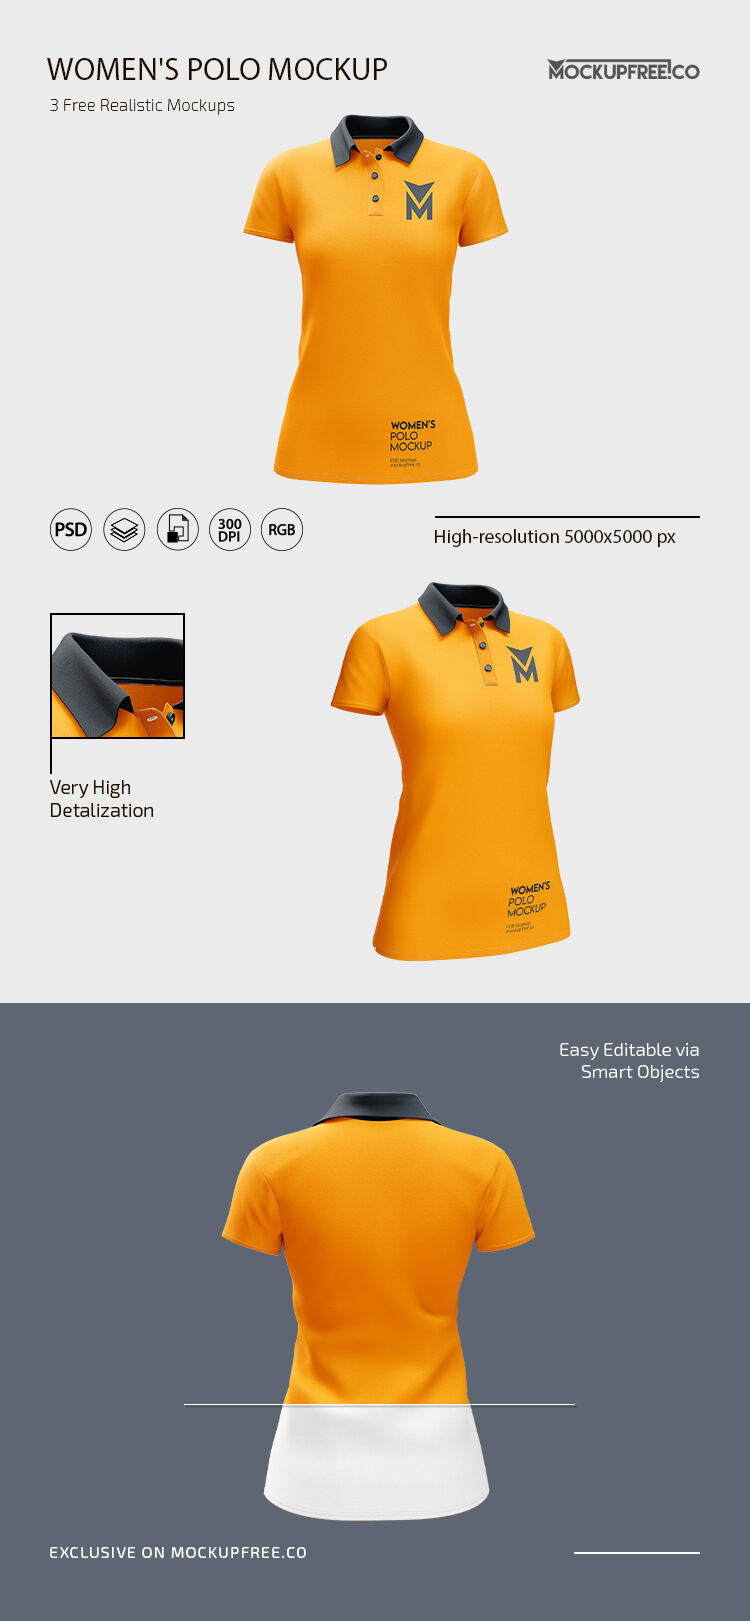 3 Women's Polo Shirt Mockups in Different Angles (FREE) - Resource Boy